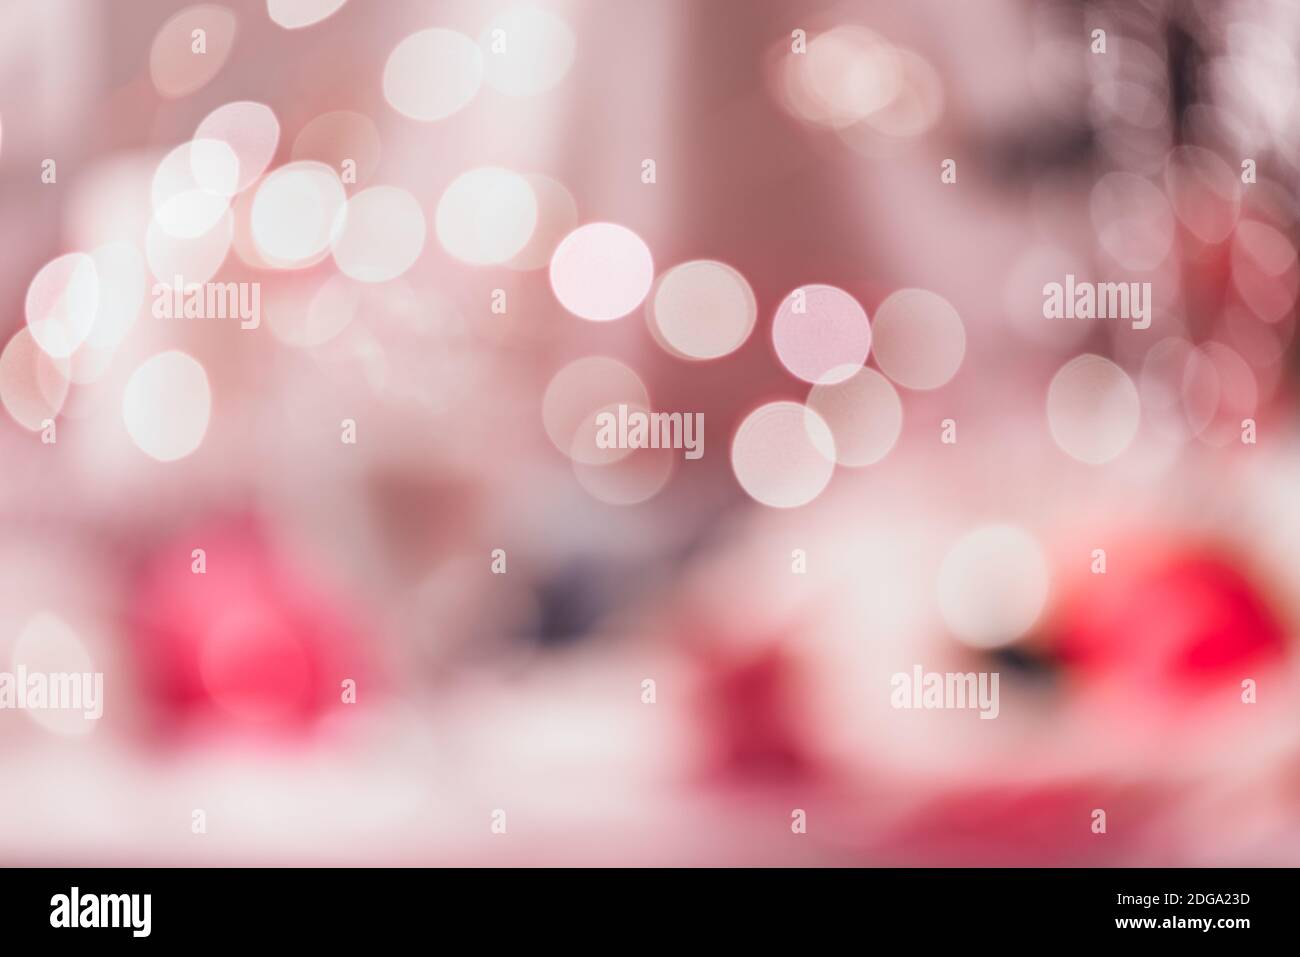 Bright round bokeh on vivid pink background new year style Stock Photo